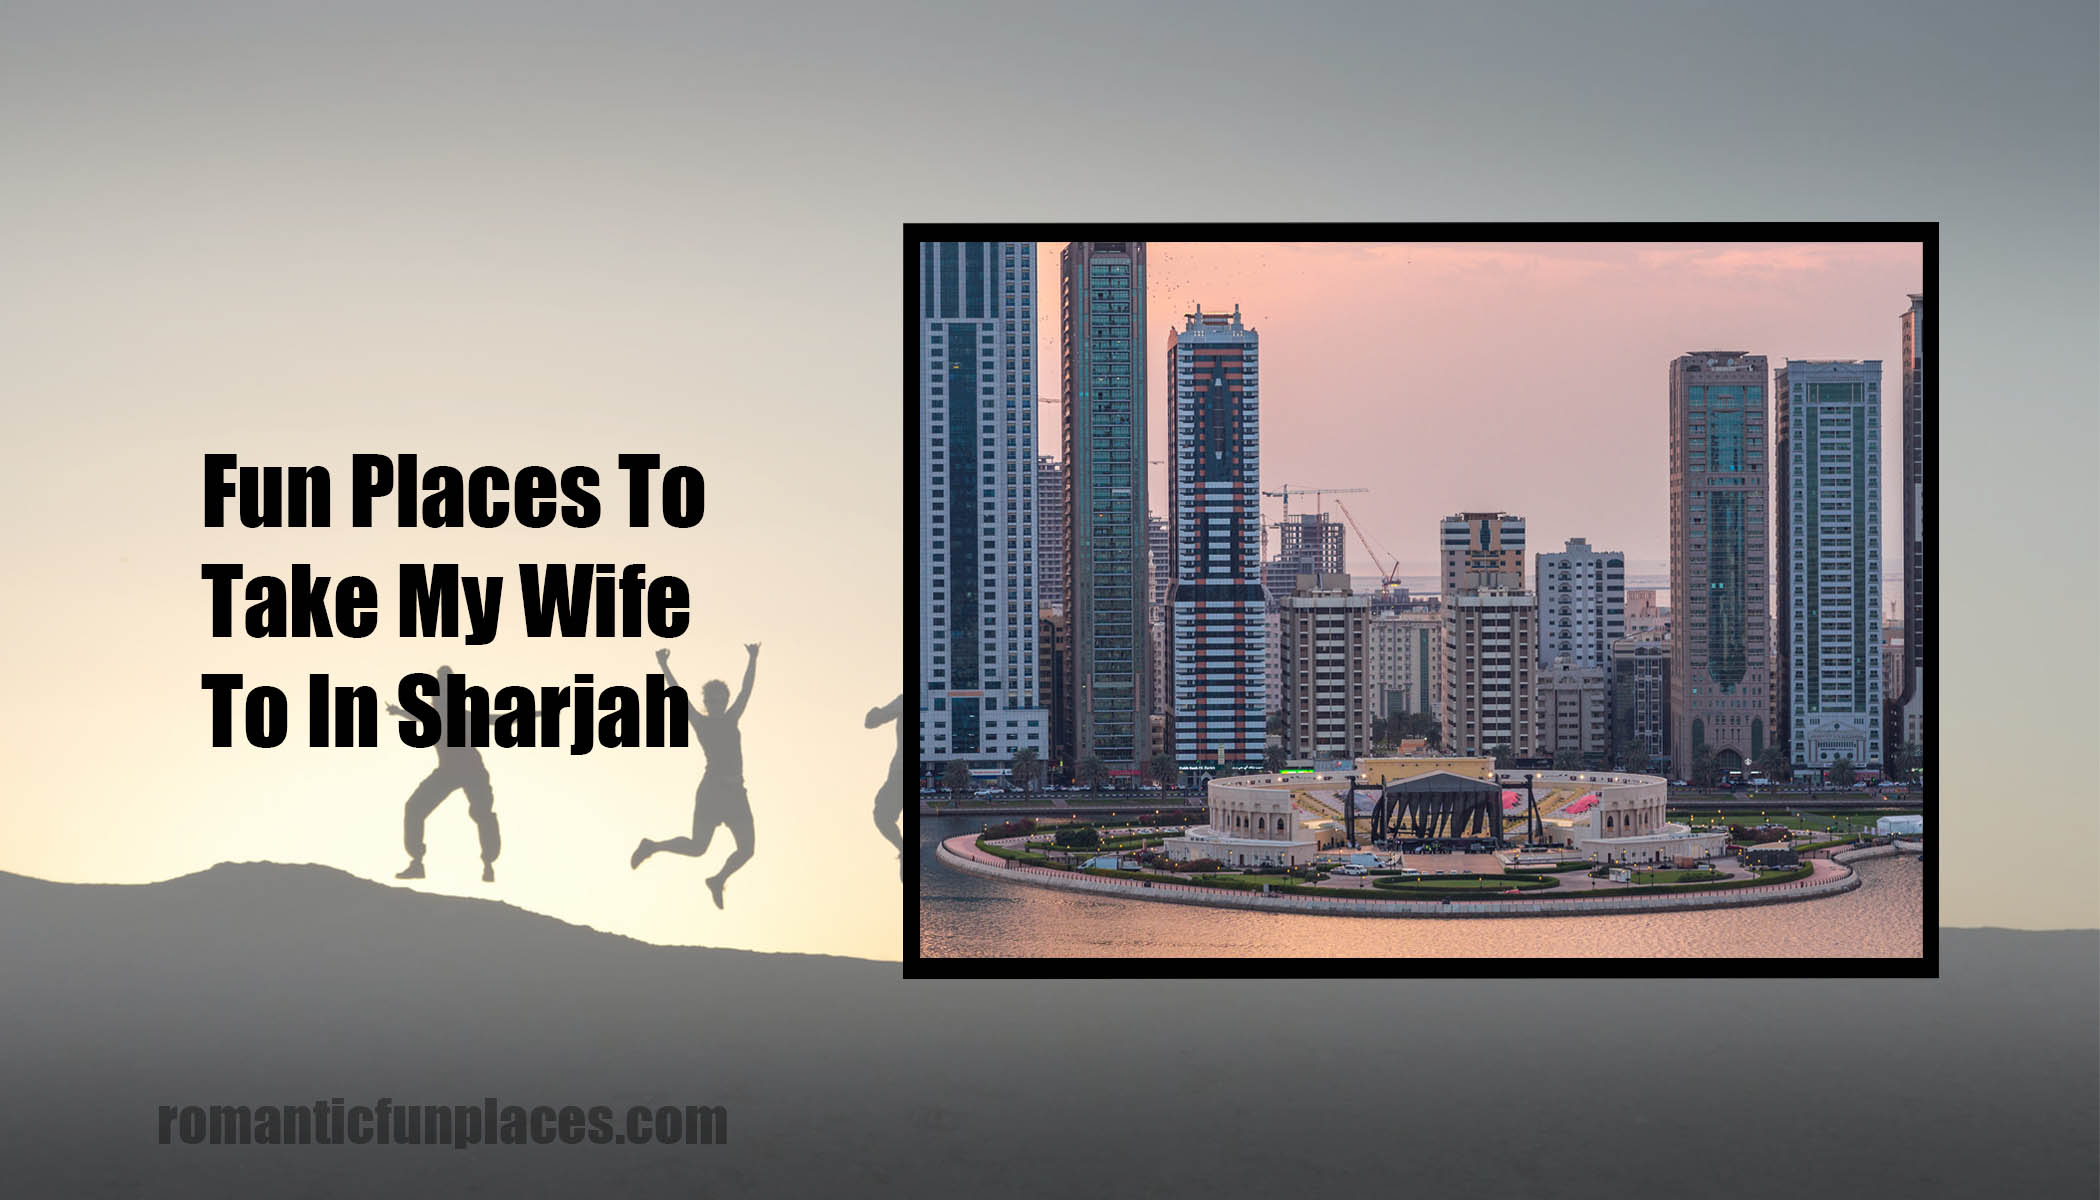 Fun Places To Take My Wife To In Sharjah